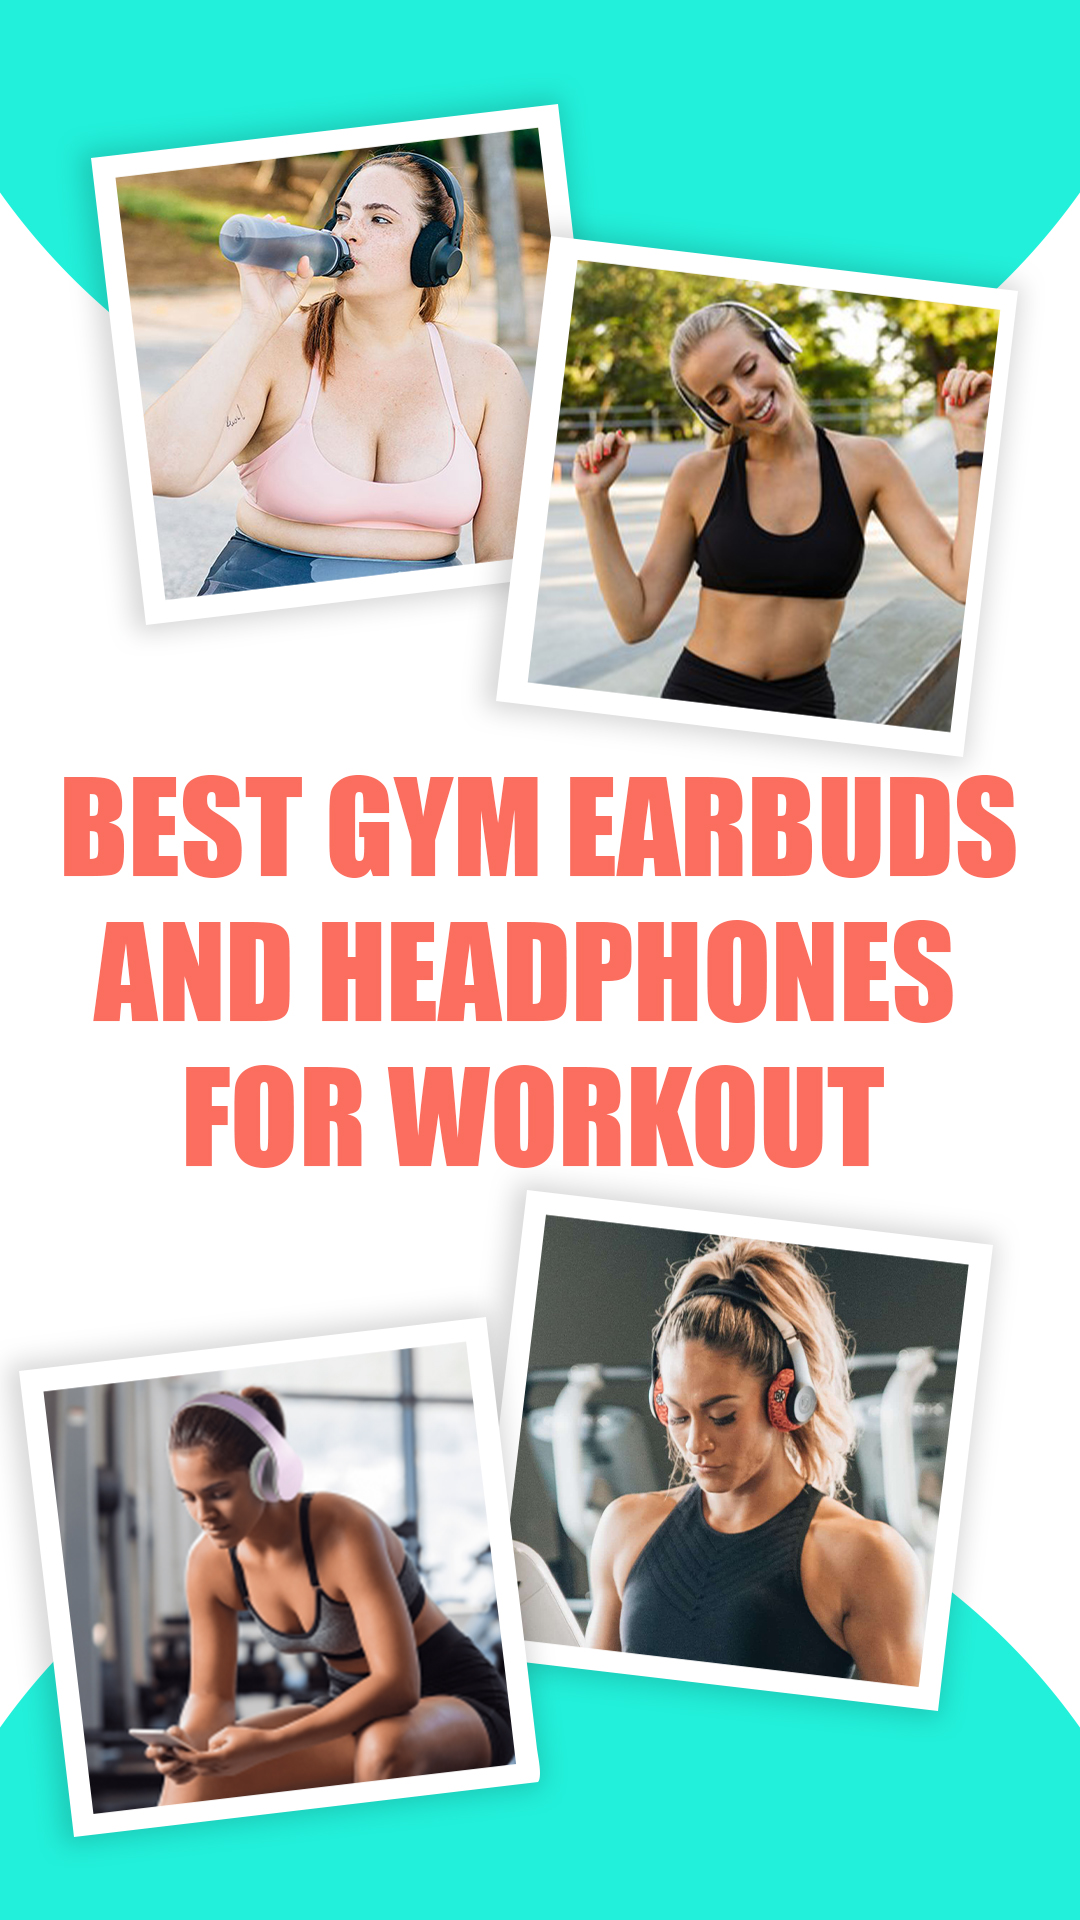 5 Best Earbuds and Headphones for Workout